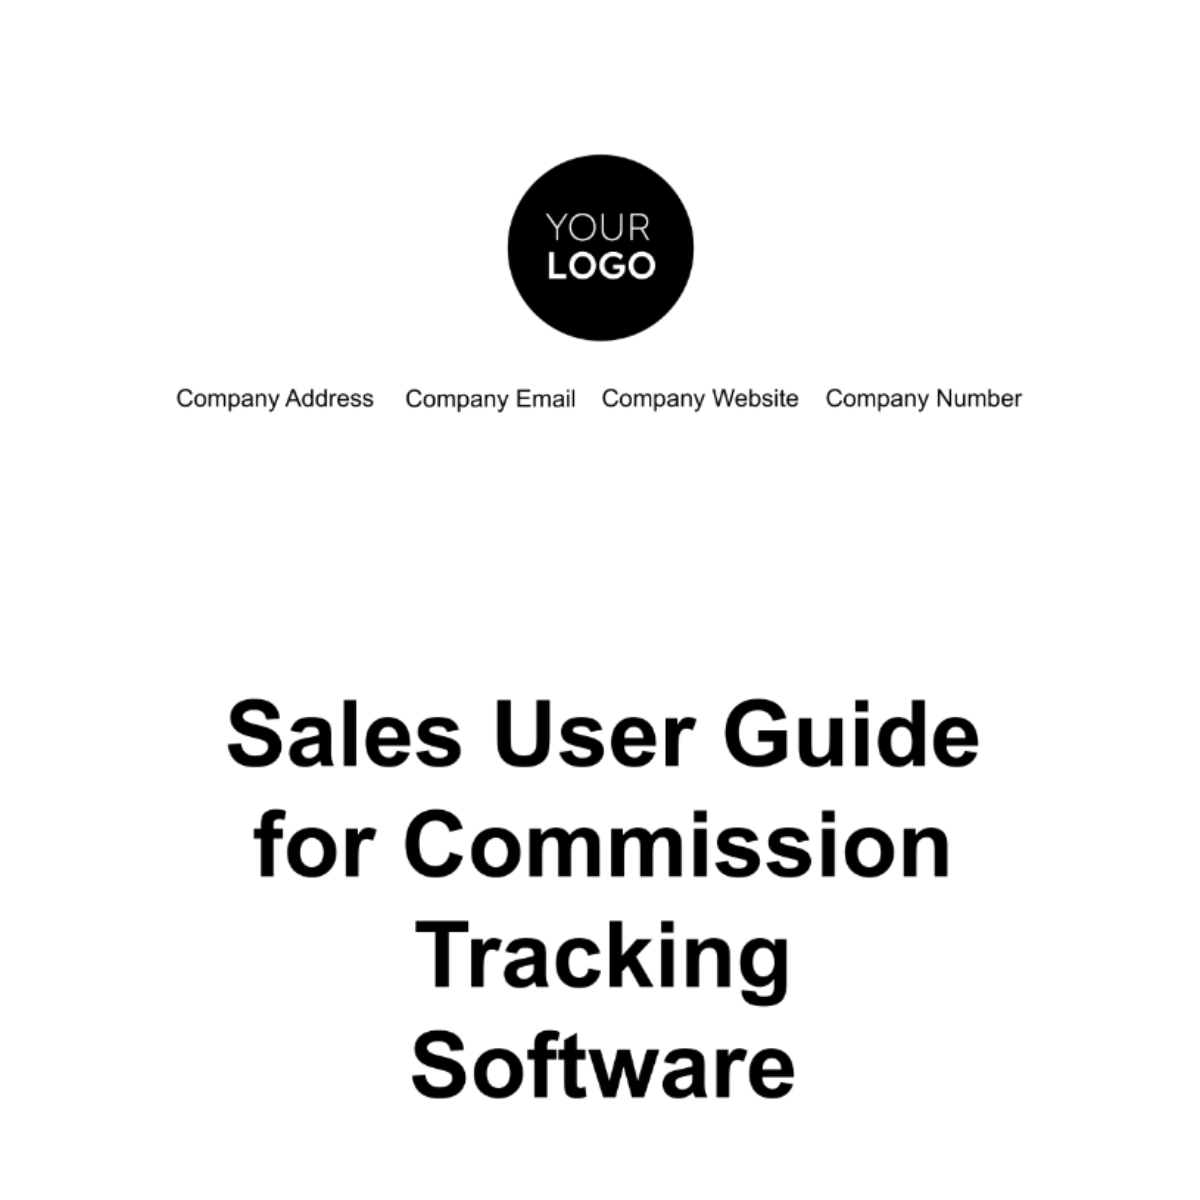 Sales User Guide for Commission Tracking Software Template